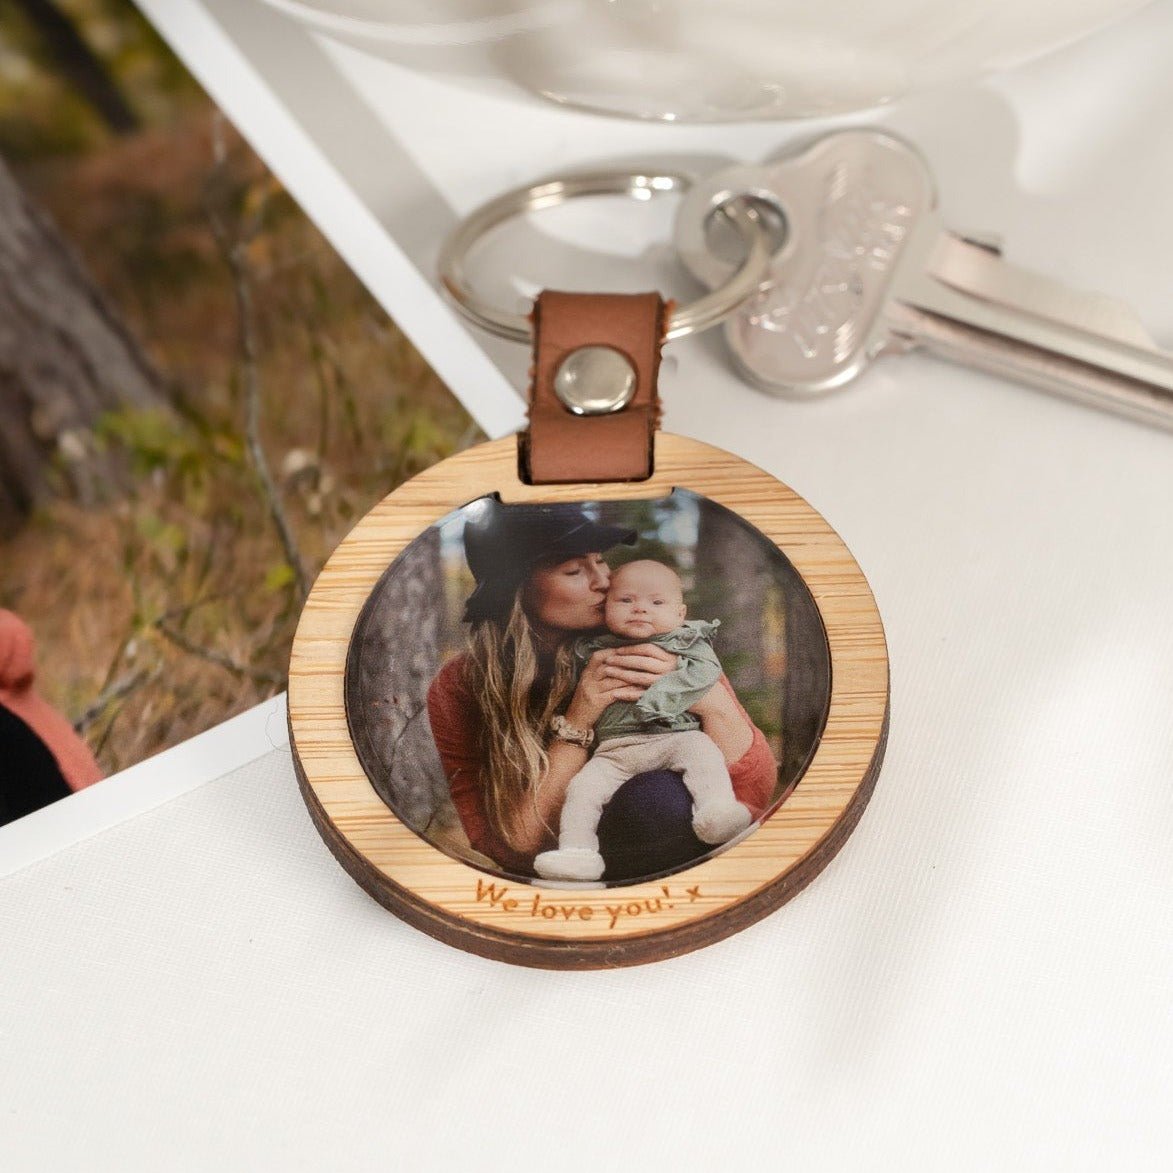 Round Luxe Photo Keytag - Arlo & Co